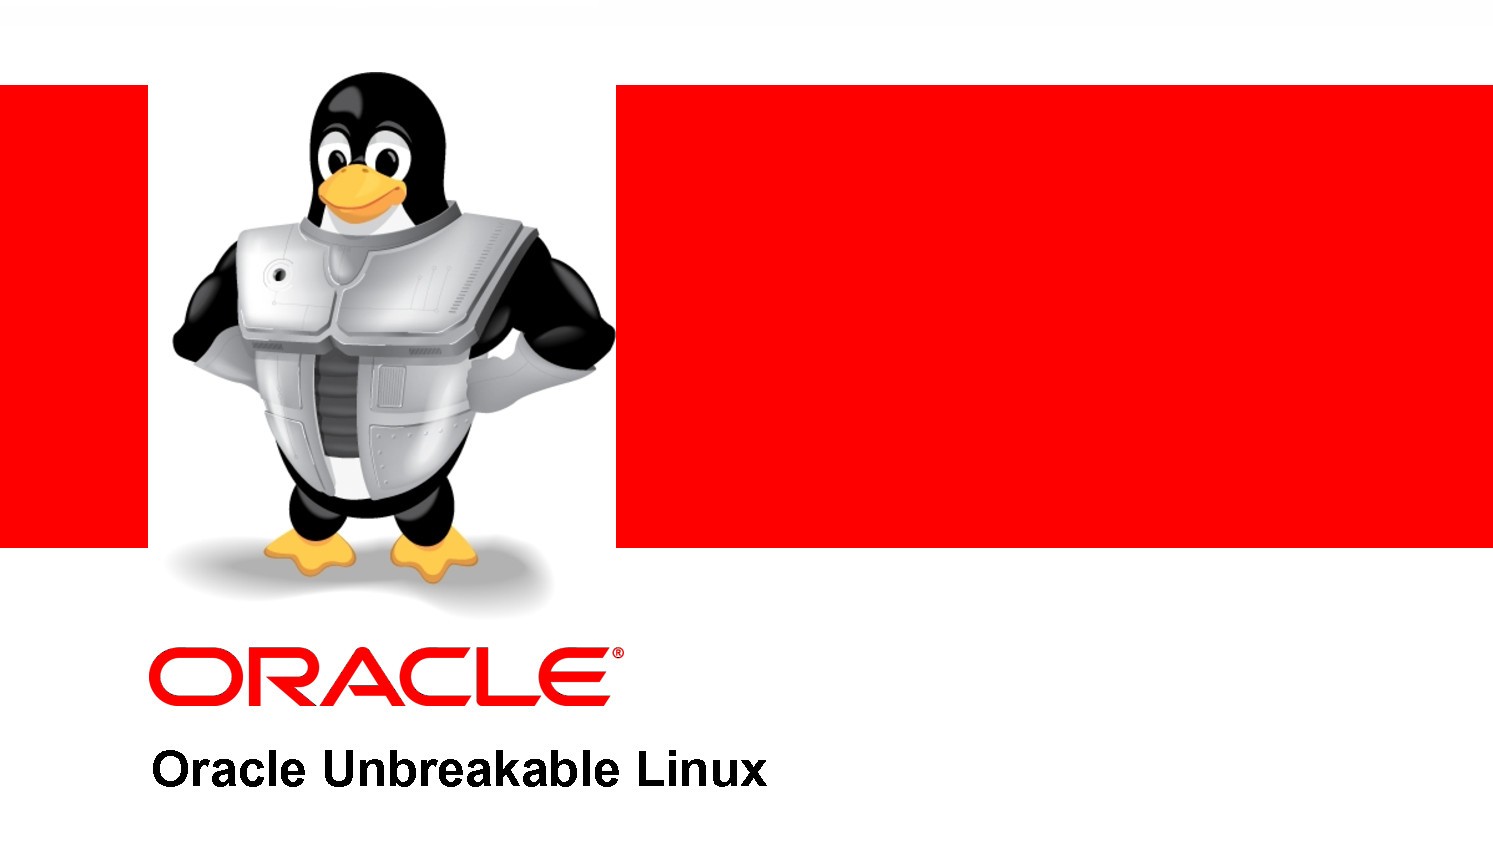 The new Oracle Linux 7.0 is out